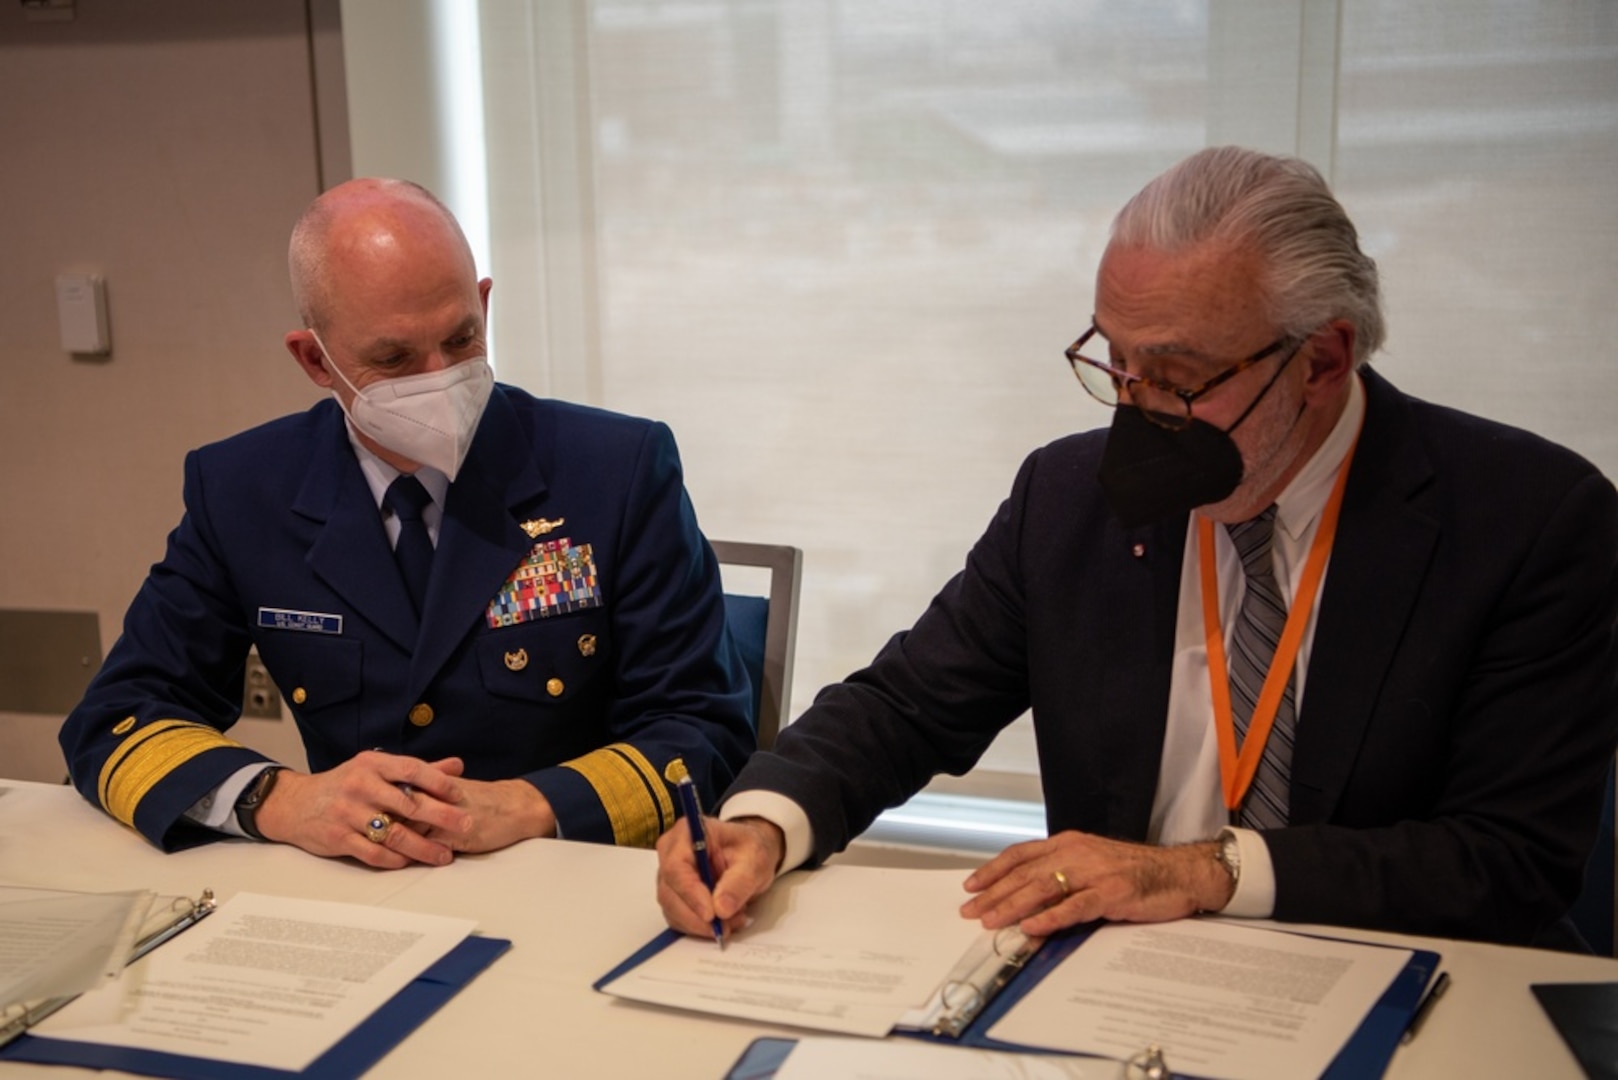 Rear Adm. William Kelly, the U.S. Coast Guard Academy superintendent, signs a memorandum of understanding with University of Massachusetts Chancellor, Marcelo Orozco, as part of the U.S. Coast Guard Academy’s Scholars Pilot program in Boston, January 28, 2022. The scholars program is intended to help students with a desire to join the Coast Guard choose an education path that will benefit them the most during their academic and military careers.(U.S. Coast Guard photo by Petty Officer 3rd Class Briana Carter)